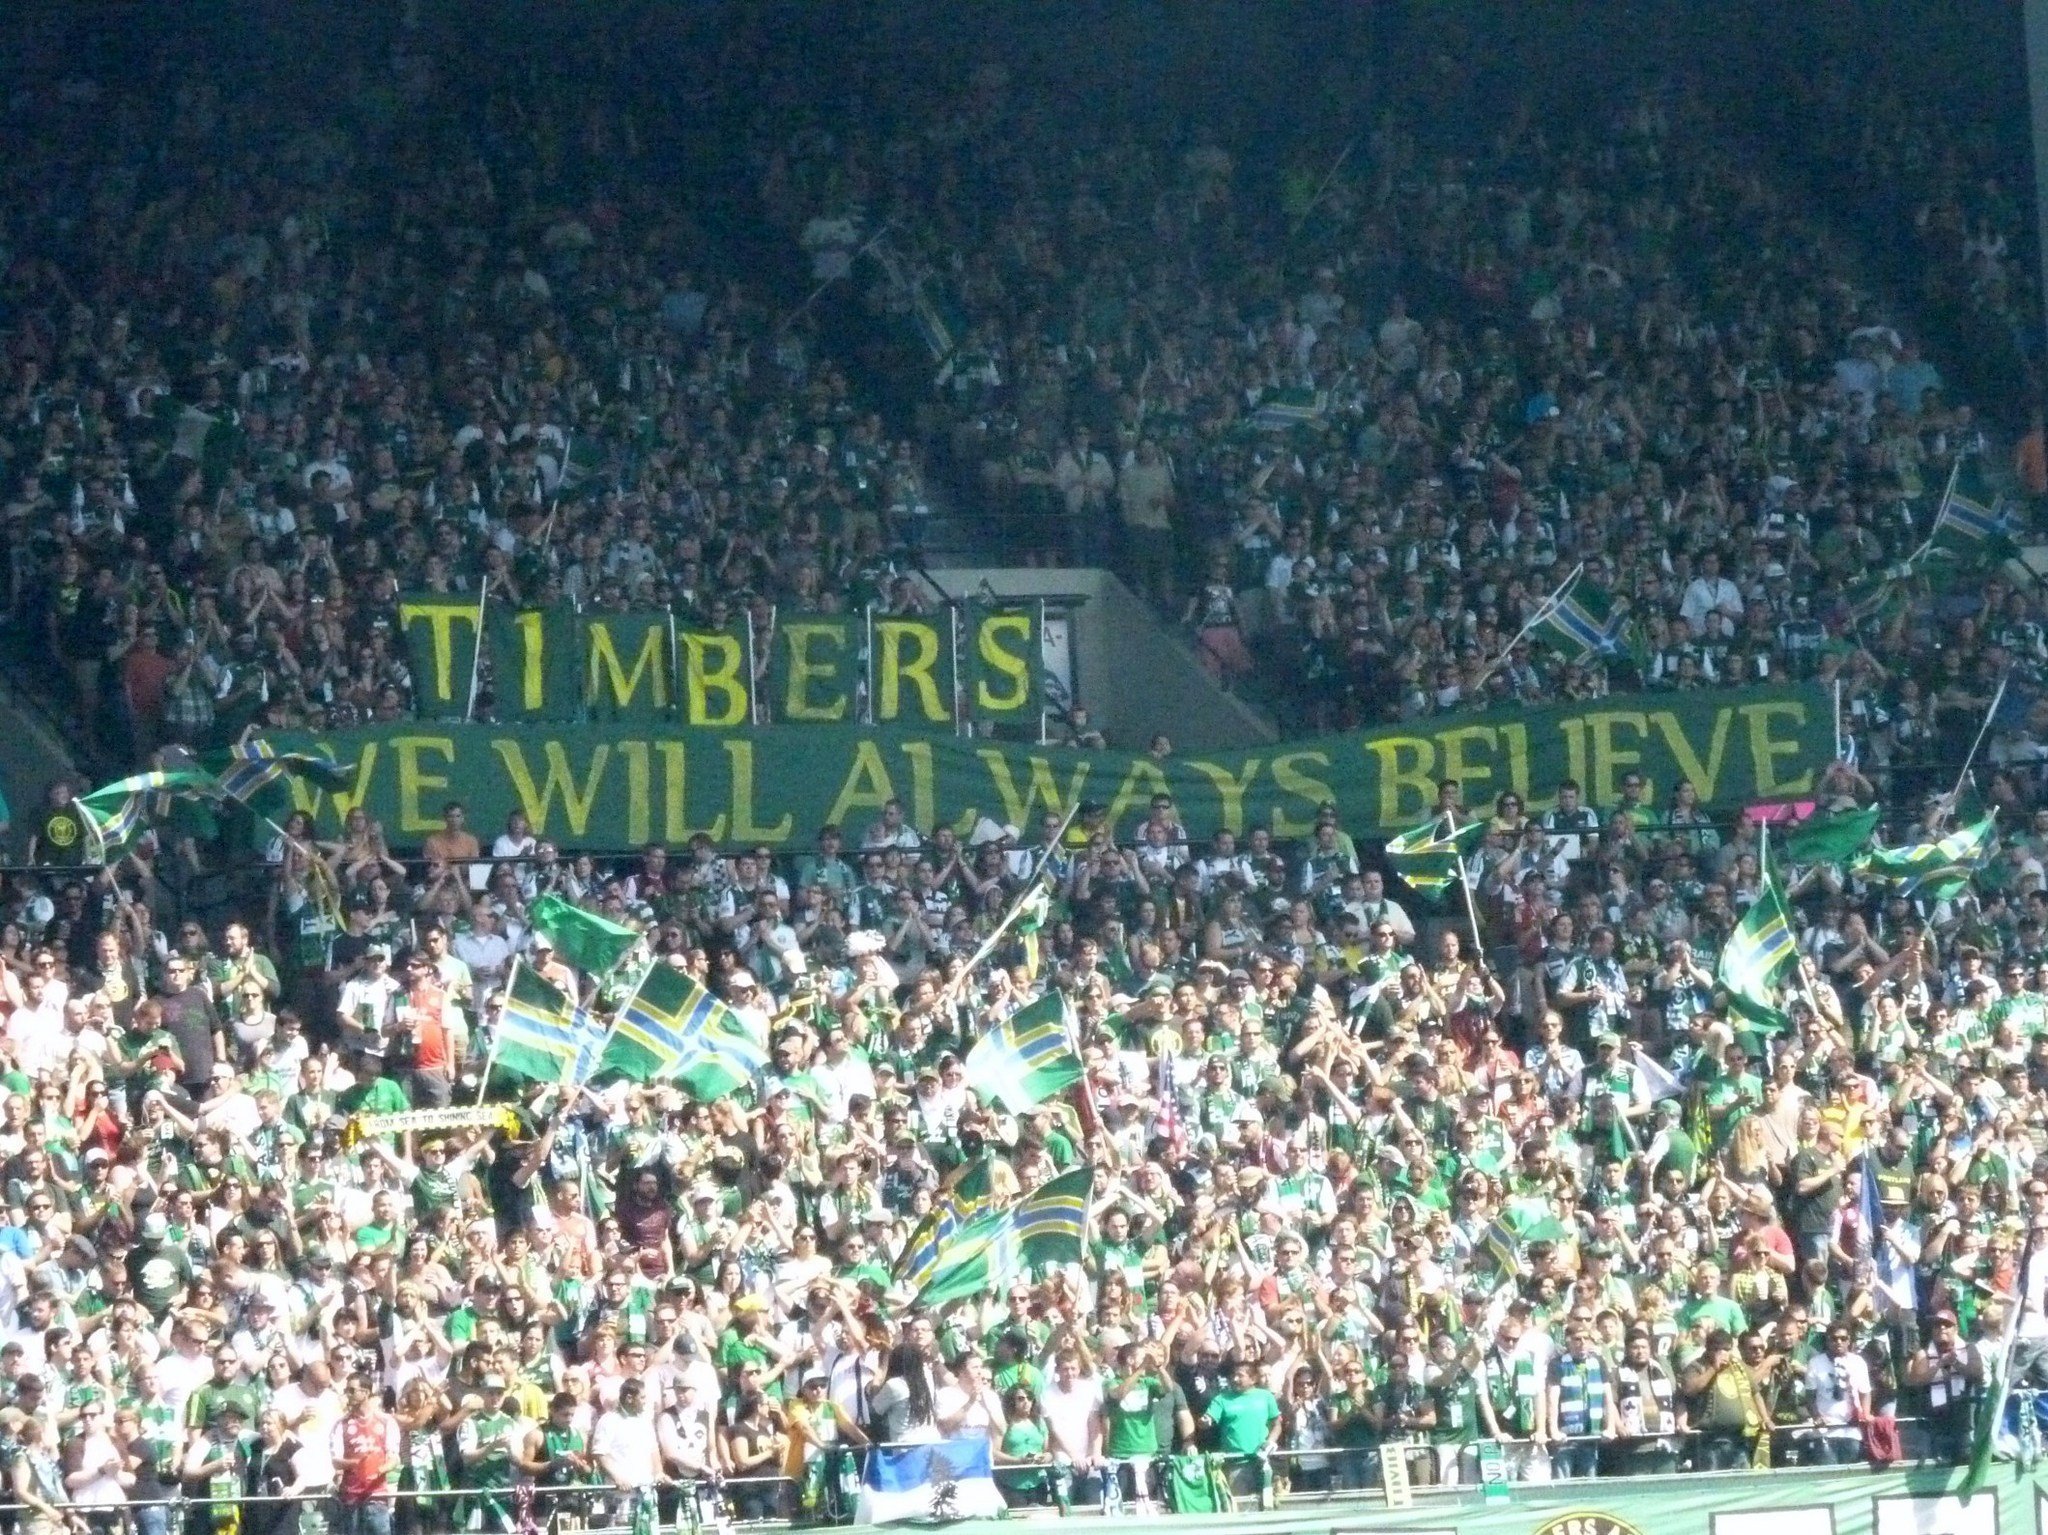 timbers-army-shows-love-for-their-sidejpg-b8a5e1686028fc95.jpg